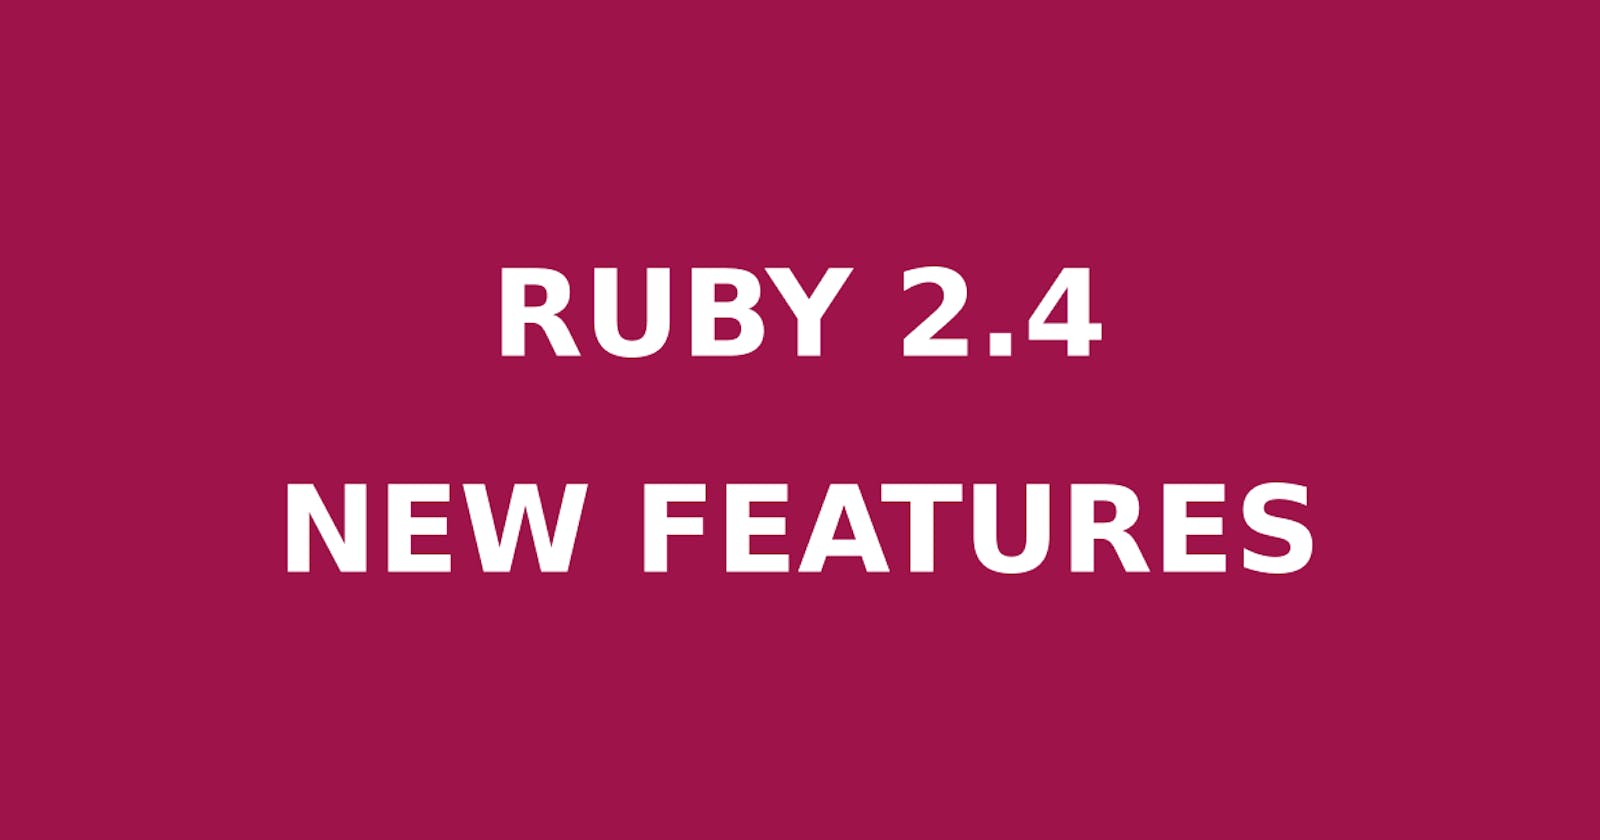 9 New Features in Ruby 2.4